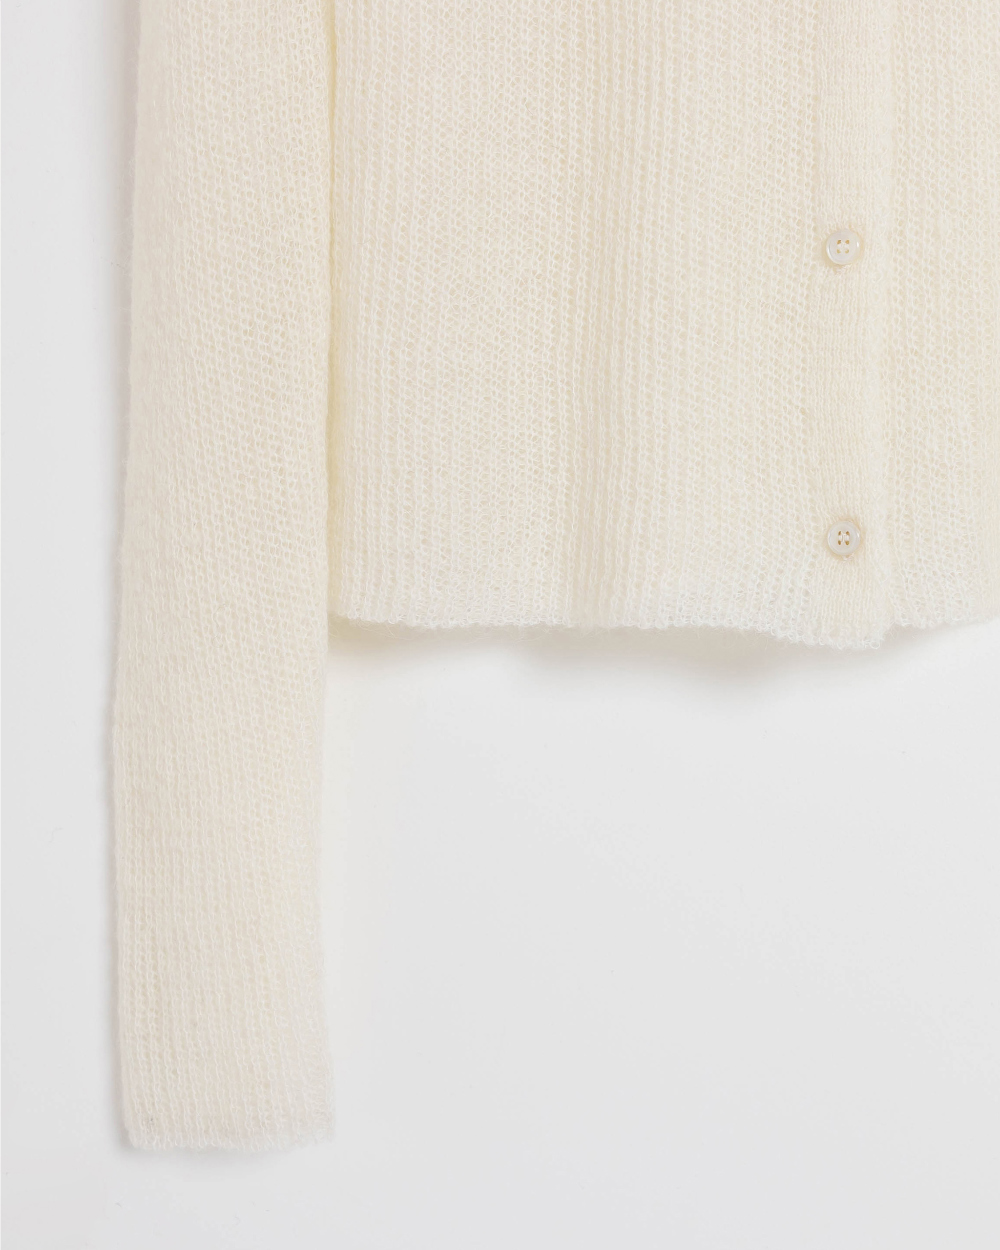 long sleeved tee detail image-S1L37